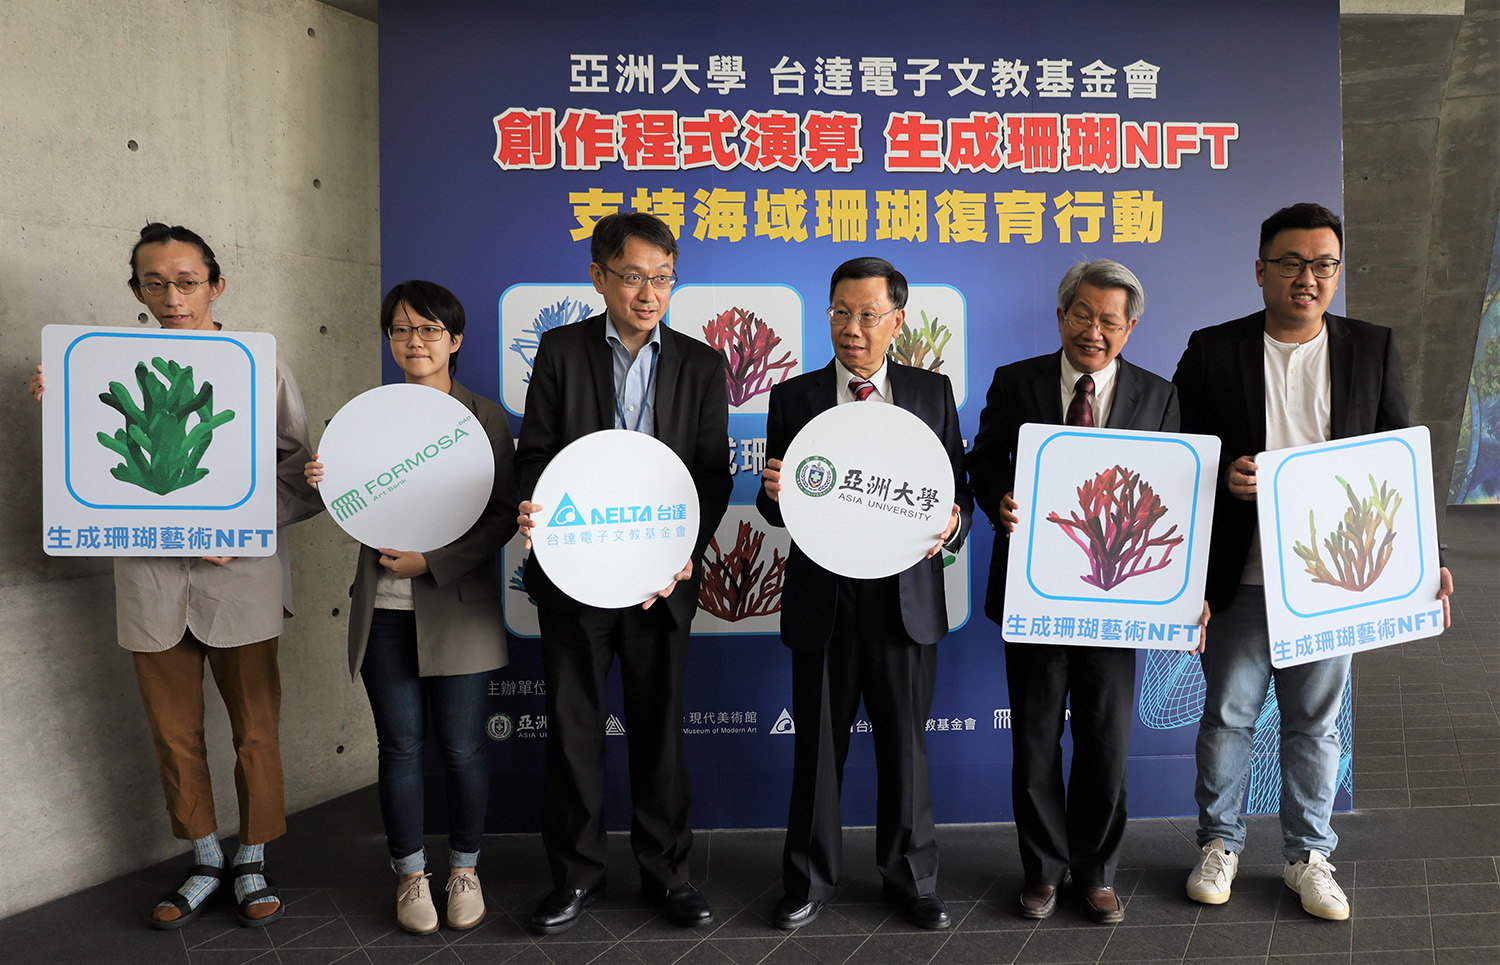 Professor Jeffrey J.P. Tsai, President of Asia University (Third from the right), Professor Fan Pan, curator of AU’s Museum of Modern Art (Second from the right), Yang-Qian Zhang, CEO of Delta Electronic Foundation (Third from the left), Professor Zhao-Neng Wang, Director of AU’s Industry-Academia Collaboration Office (first from the right), Wen-Jun Huang, Co-founder of FAB DAO(second from the left), and Generative artist Nai-Ting Liu (First from the left) take a group photo and introduce the first ever Calculation Coral Art NFT.